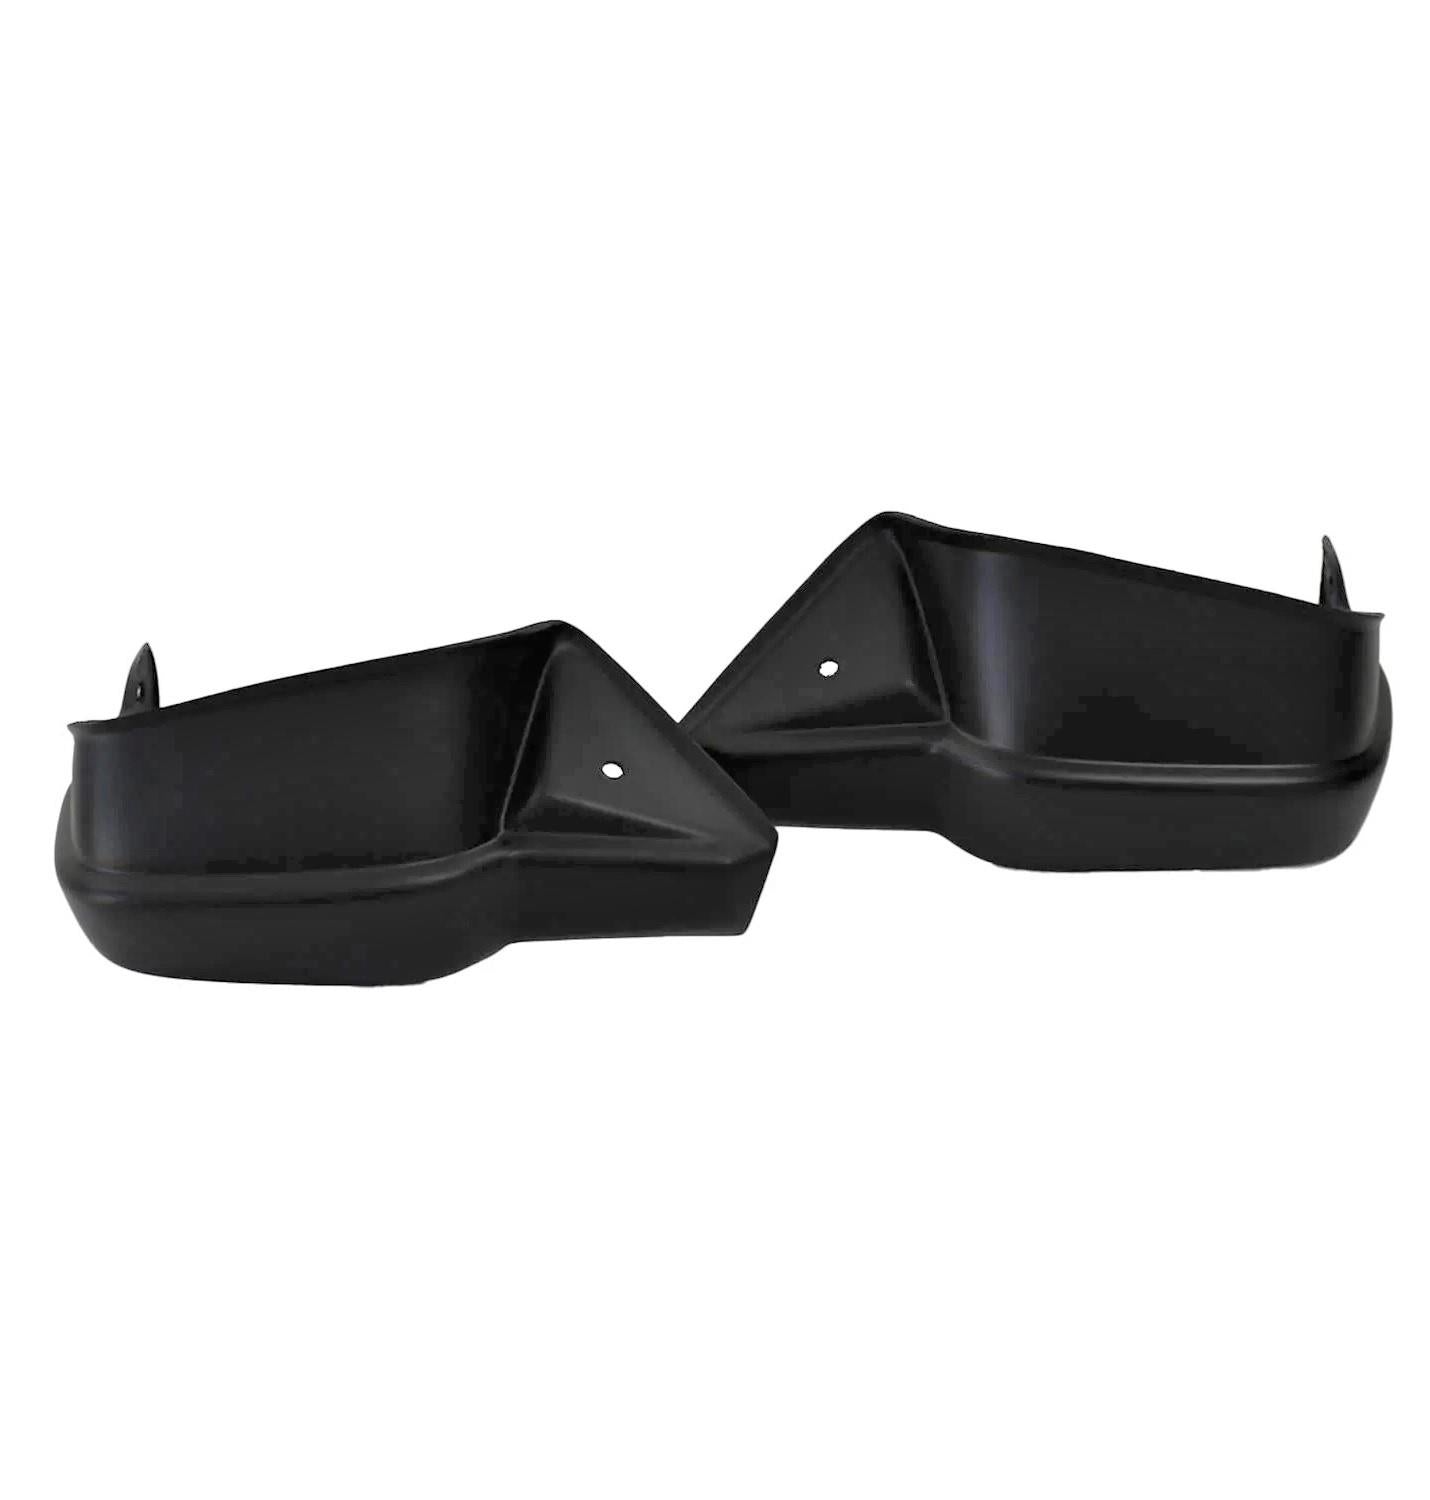 BMW G310GS hand guards protection 2017-23